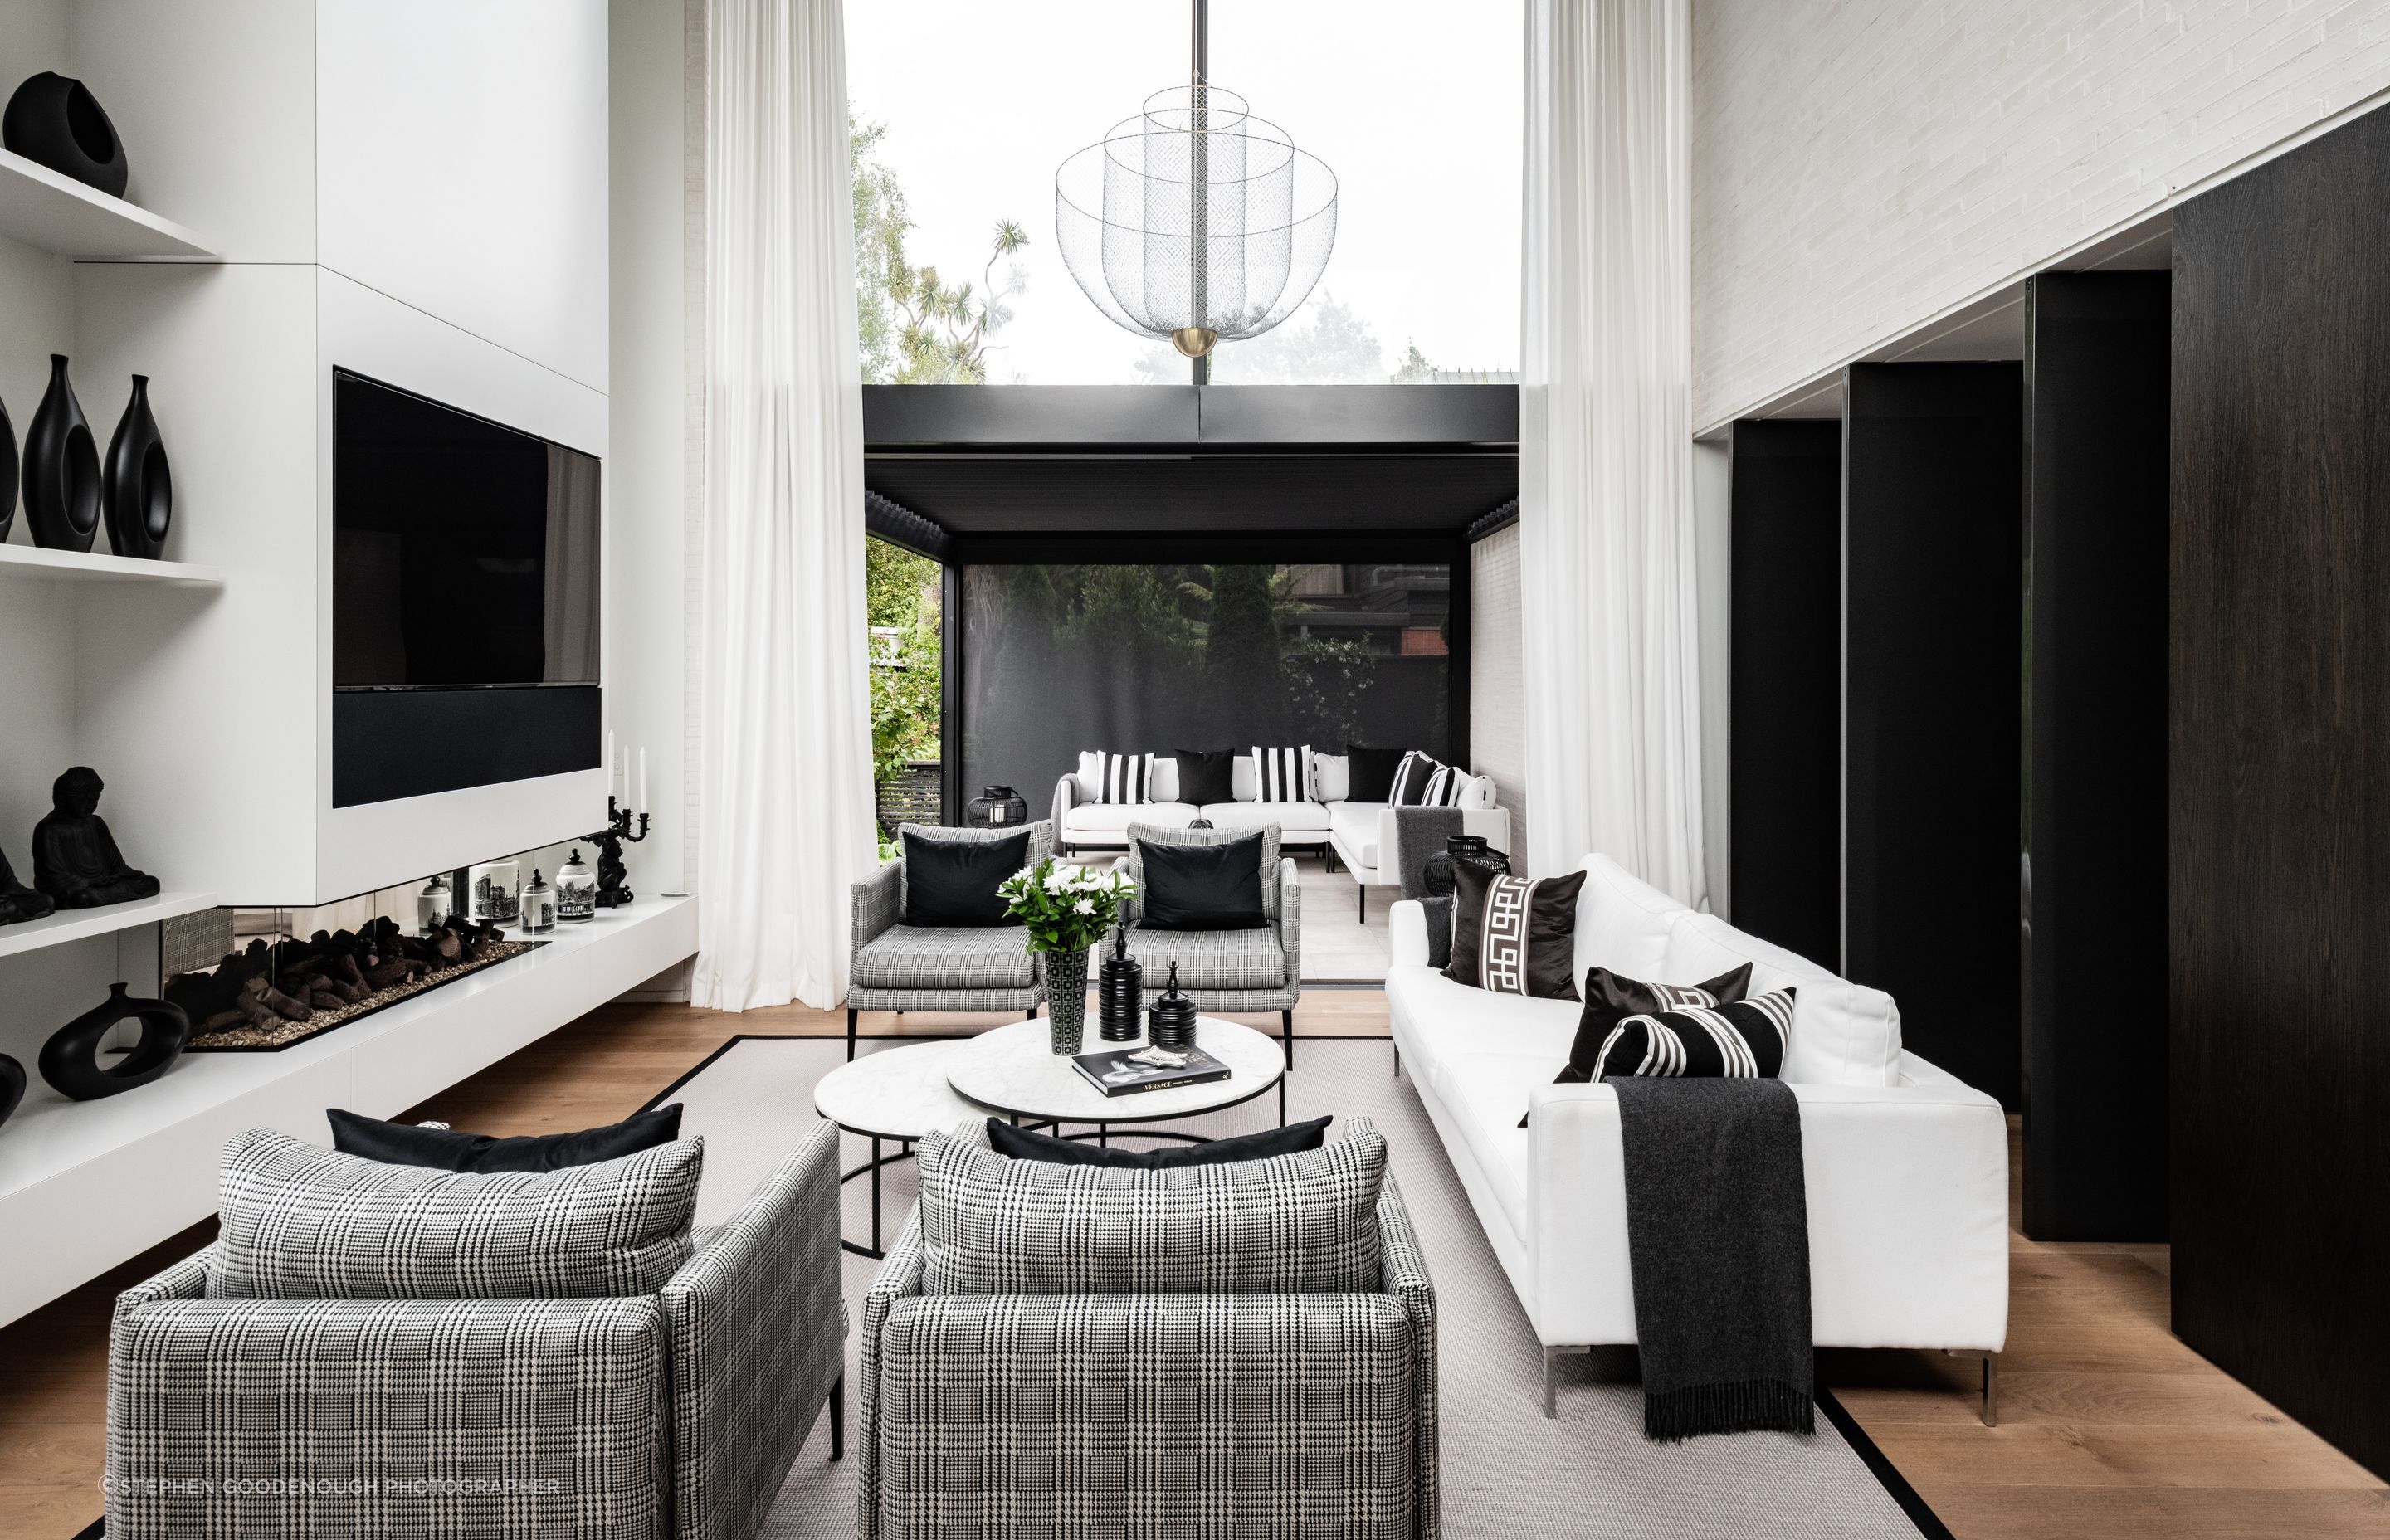 The living area leads straight out to a louvred outdoor room, and through the pivoting doors on the right is a private sitting room and the master bedroom. "The clients loved the simple black and white colour palette but then we've used timbers to warm it up a little.”